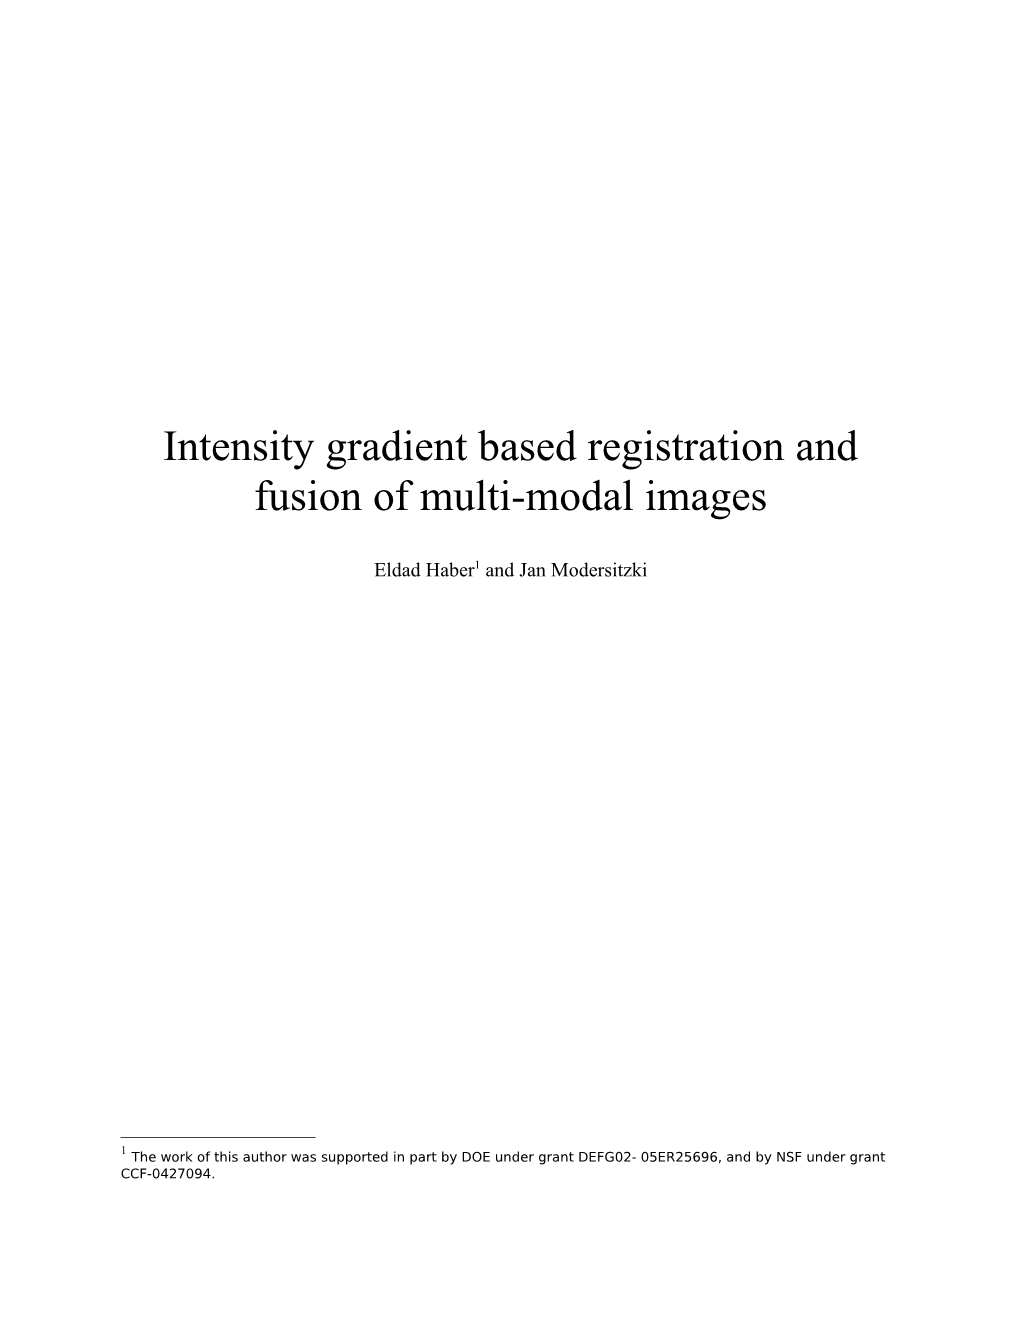 Intensity Gradient Based Registration and Fusion of Multi-Modal Images